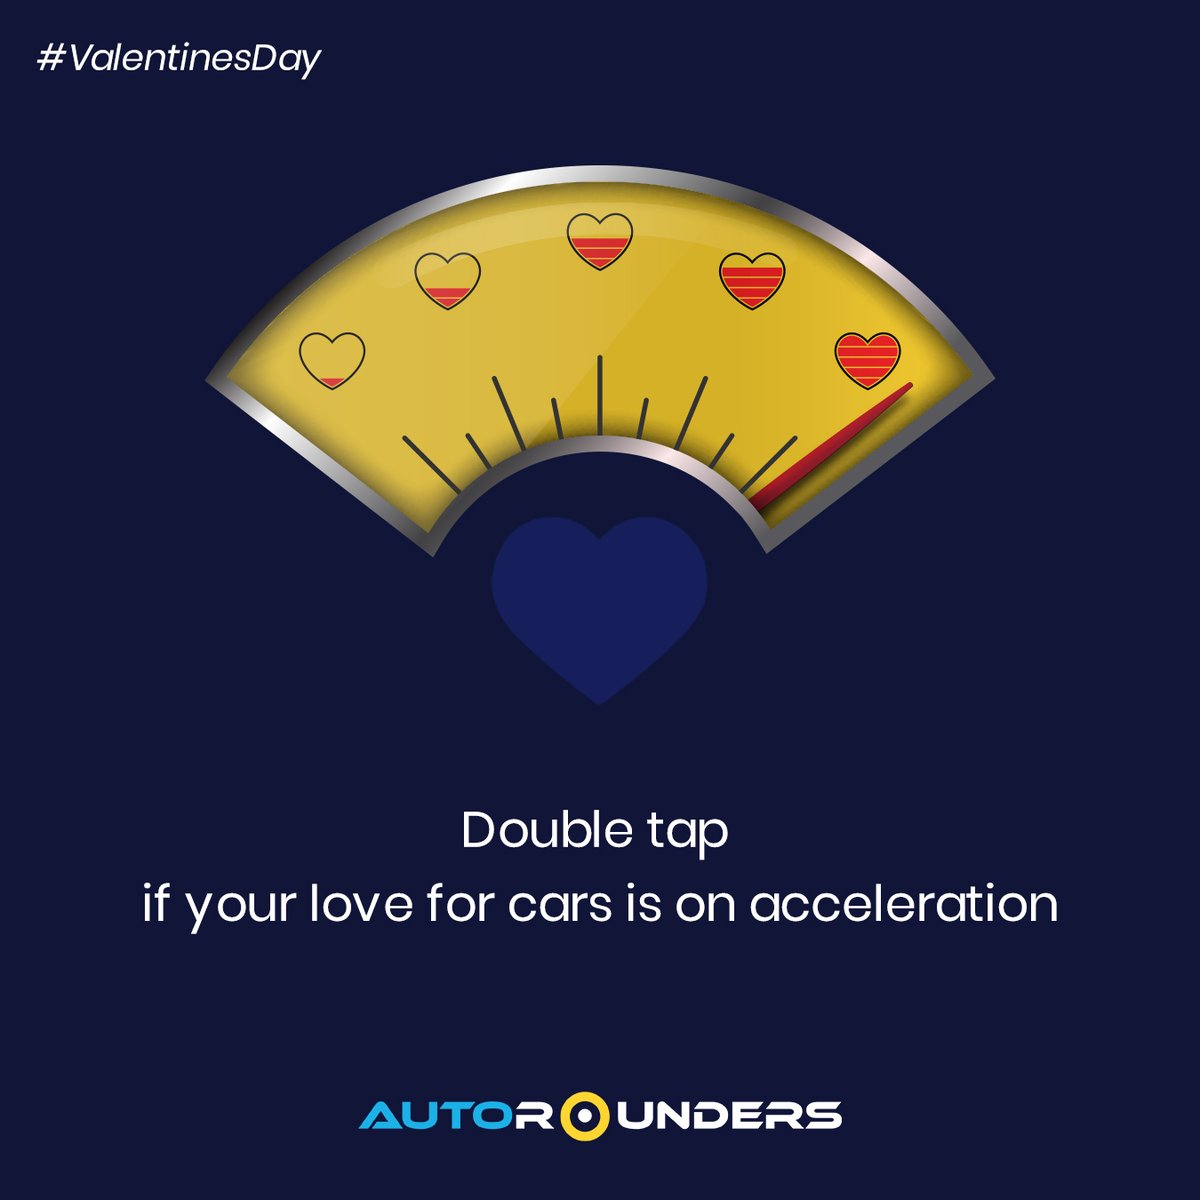 We hope that your true love for cars will always be on acceleration. Wishing you a very Happy Valentine’s Day! 
#Autorounders #Valentin'sday #Valentine #loveforcars #customization #modification #modified #modifiedcars #carsofinstagram #carservices #Mumbai